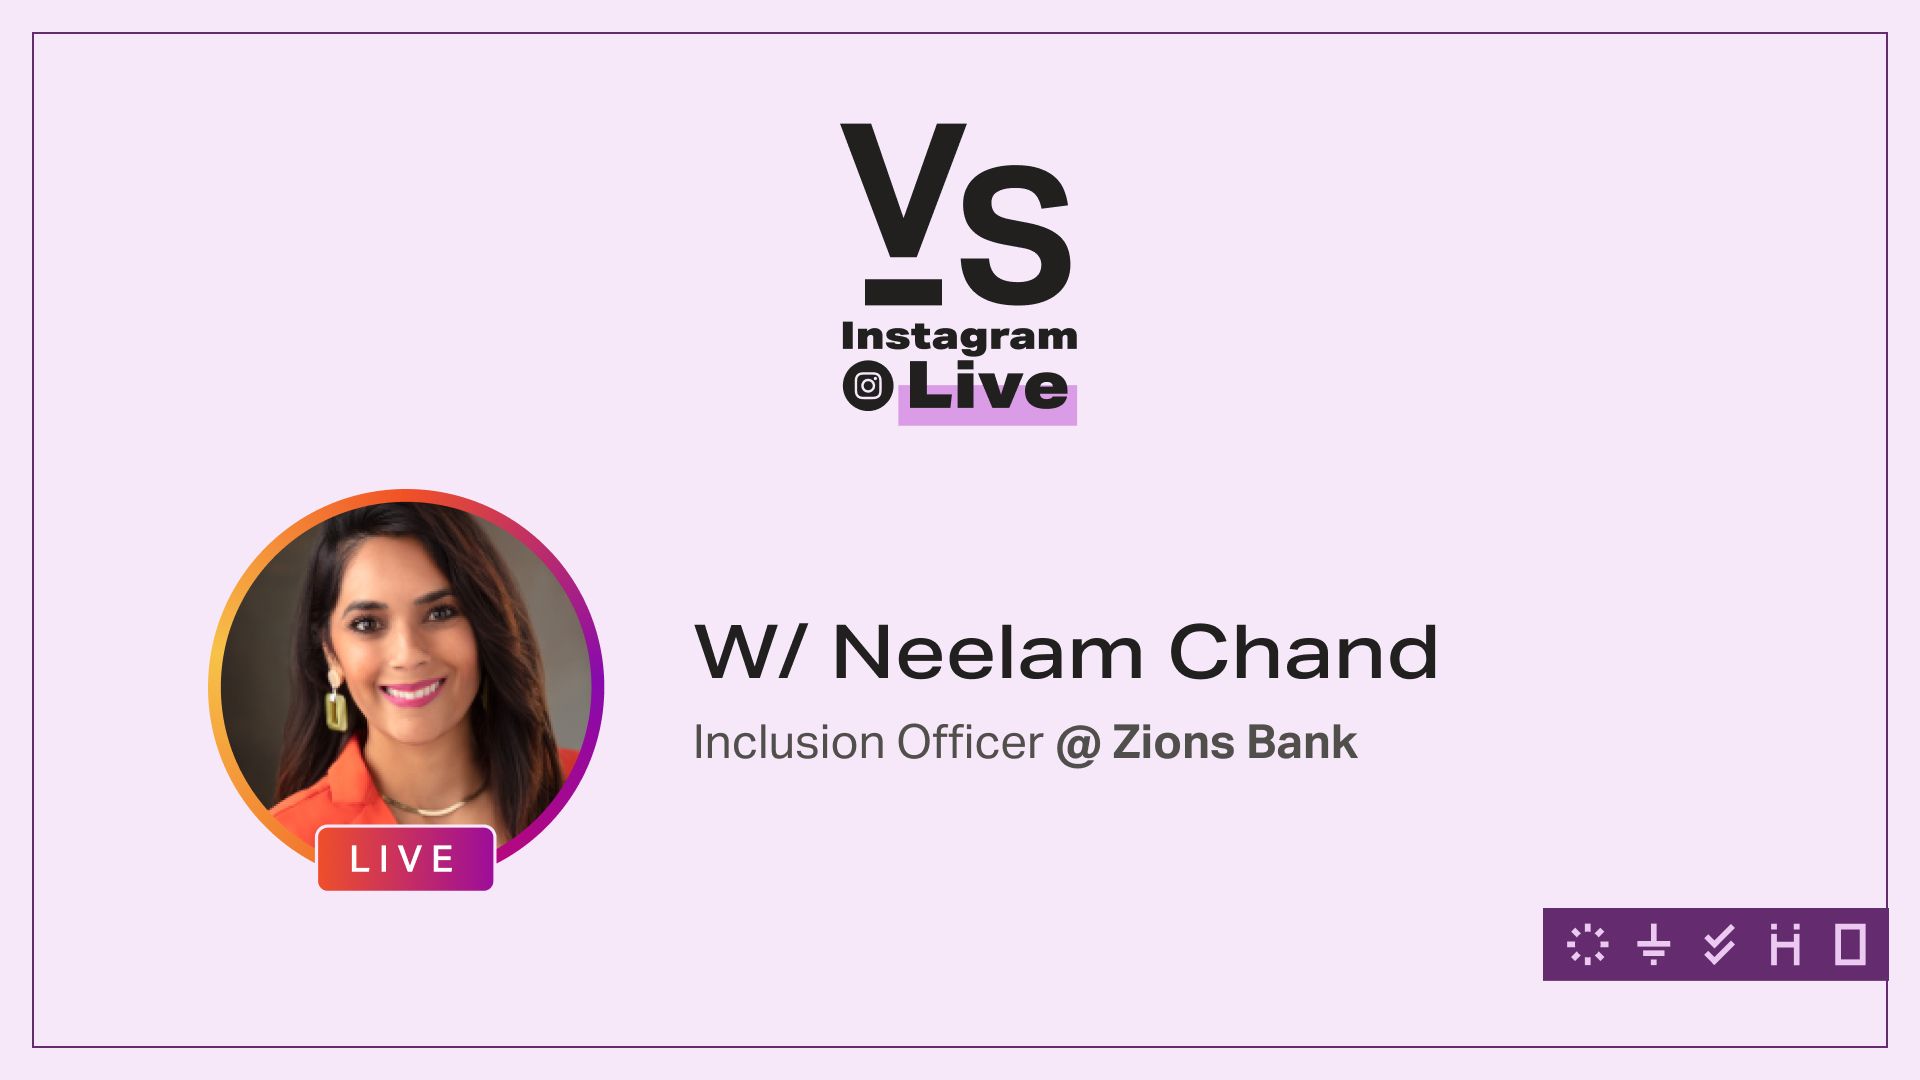 IG Live: Inclusion Officer at Zions Bank - Neelam Chand